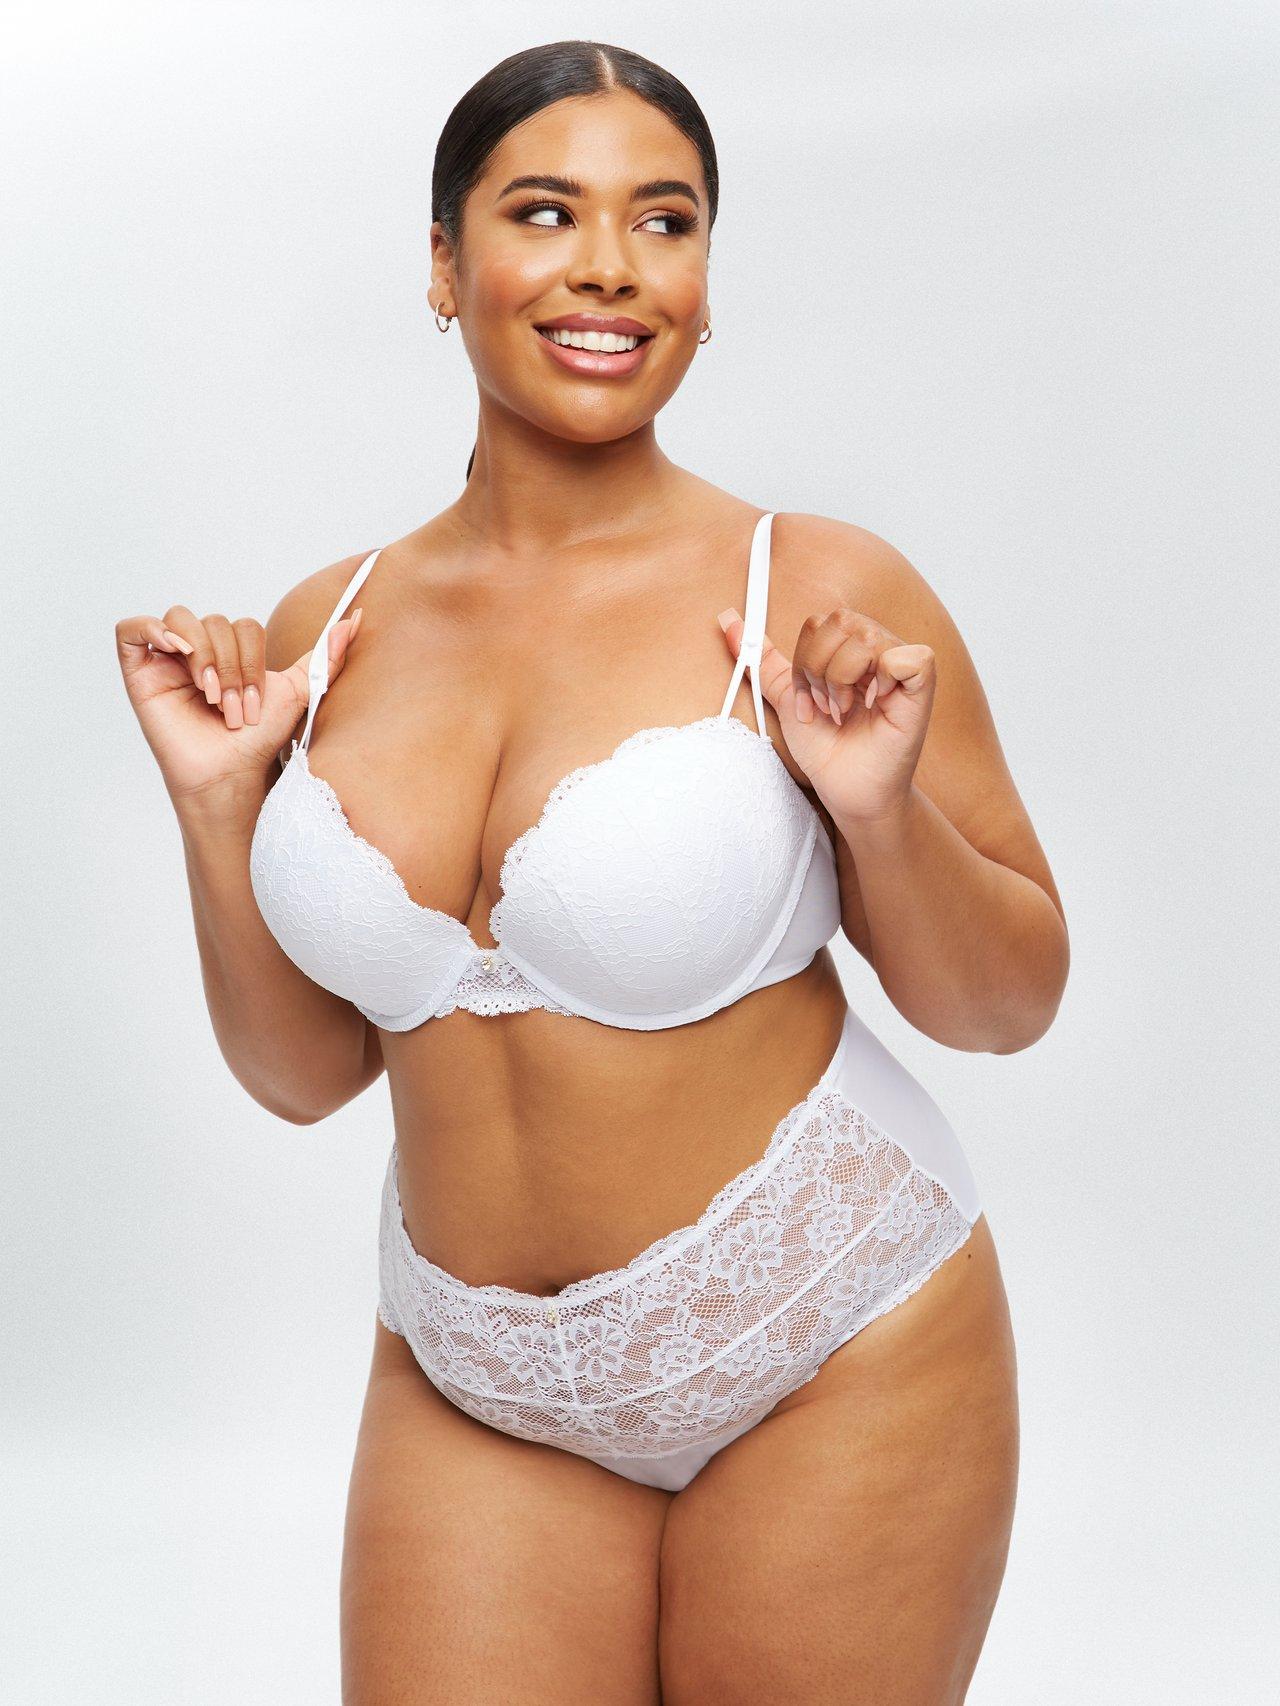 Plus Size Lingerie: 28 Stunning Sets & How to Choose - hitched.co.uk